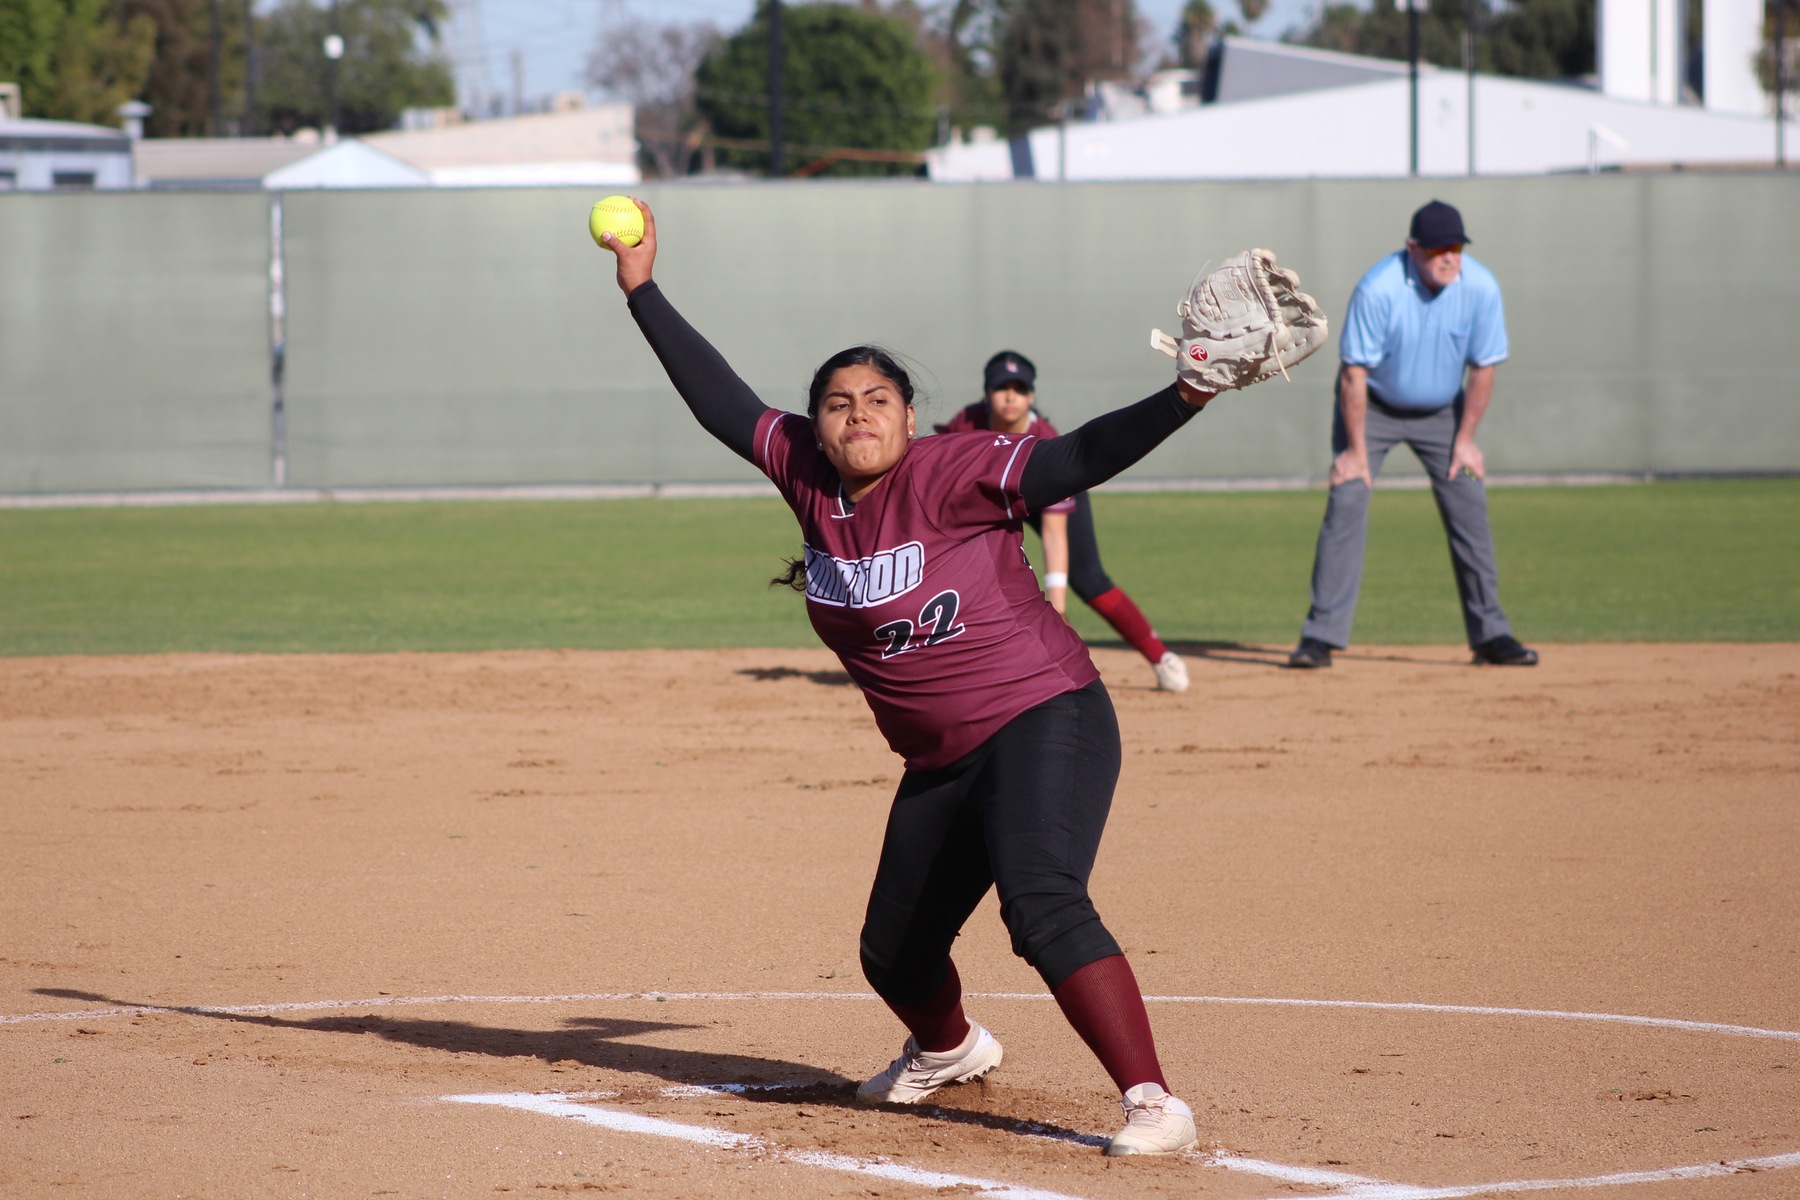 Soriano Strikes Out Seven in Match against El Camino